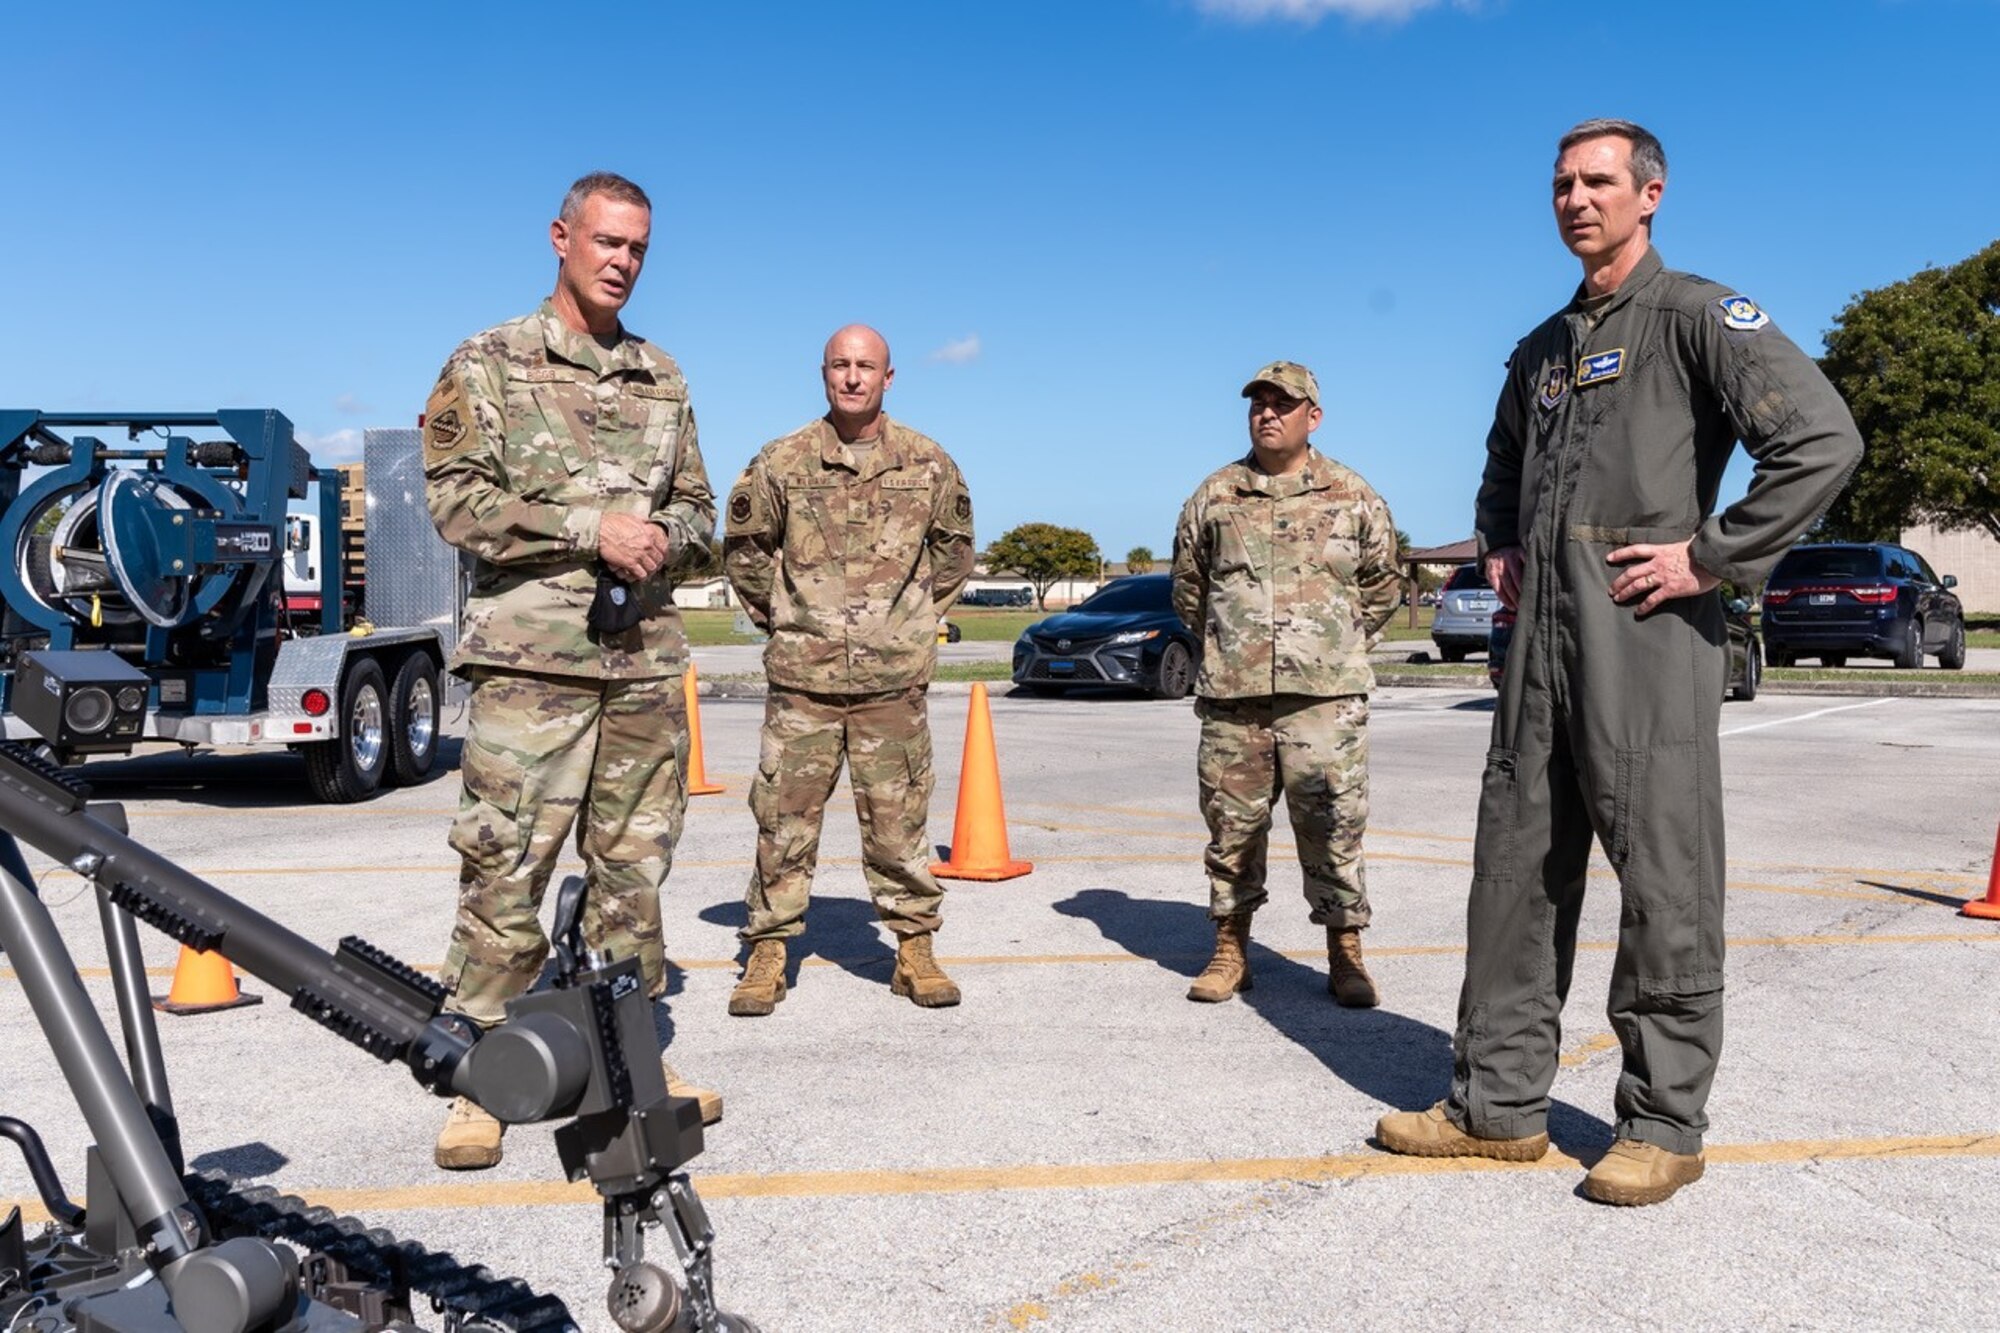 (Left) Col. David A. Biggs, 482nd Mission Support Group commander, gives a briefing to Maj. Gen. Bryan Radliff, 10th Air Force commander, about the 482nd Explosive Ordnance Disposal Team at Homestead Air Reserve Base, Florida, Feb. 7, 2022. Trained to detect, disarm and dispose of explosive threats in the most extreme environments, EOD technicians bravely serve as the Air Force’s bomb squad. (U.S. Air Force photo by Tech. Sgt. Lionel Castellano)